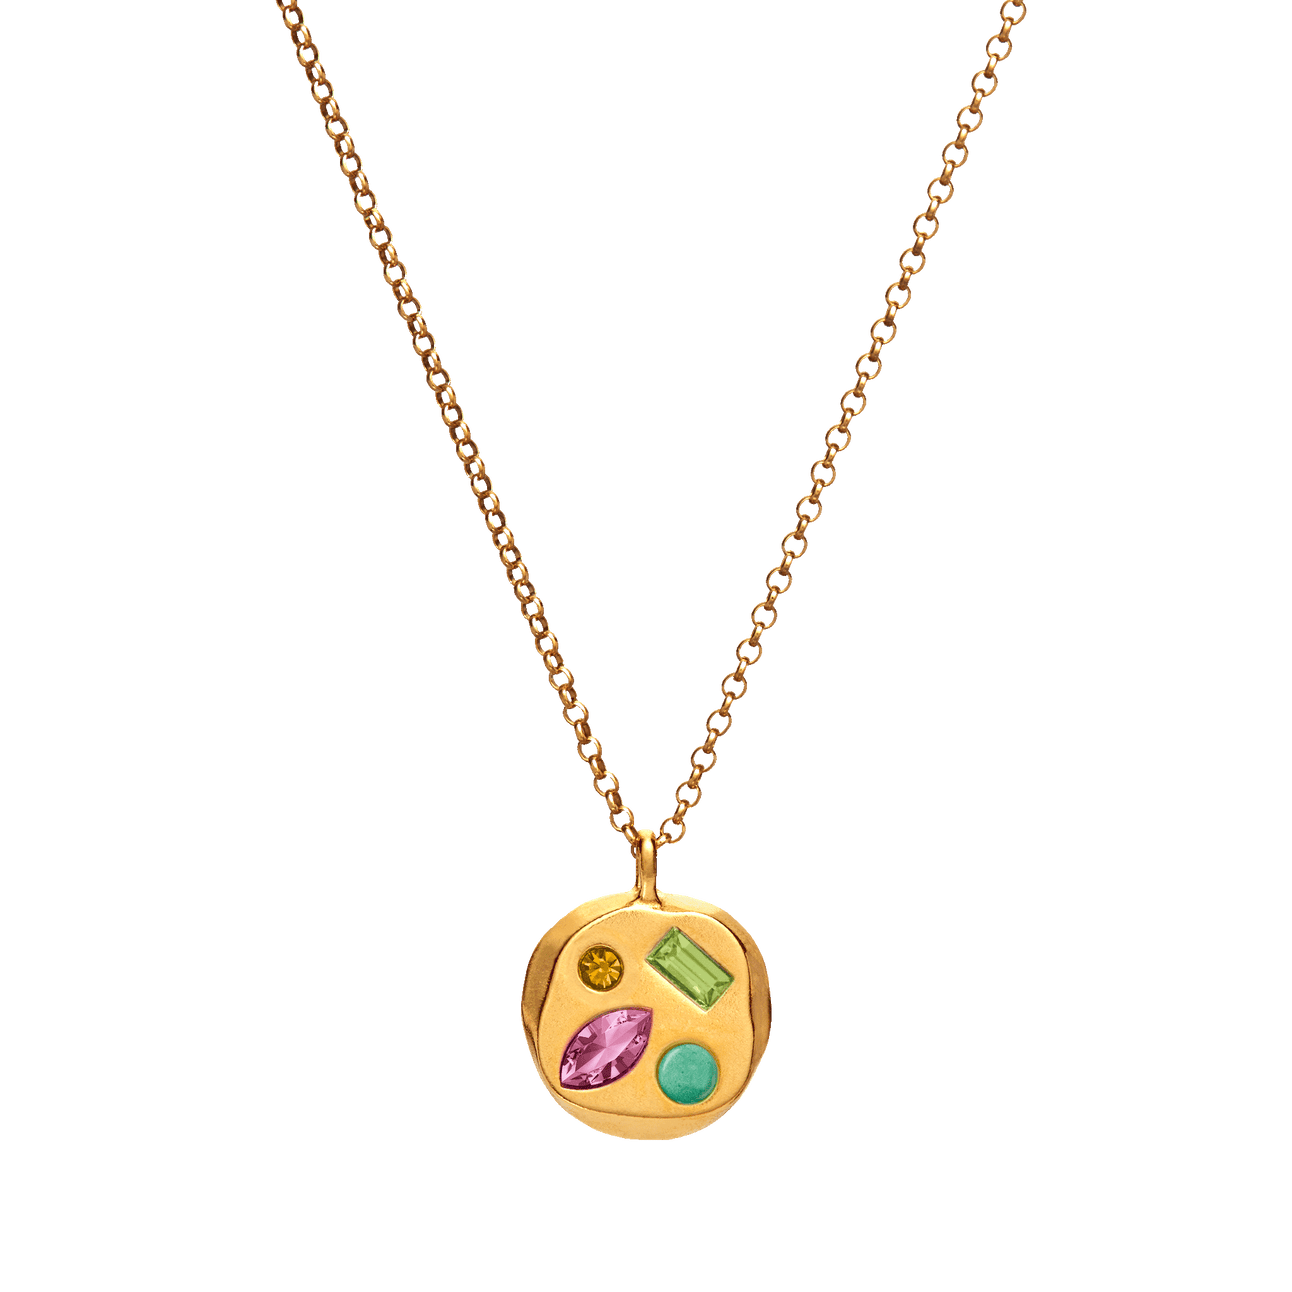 The October Tenth Pendant